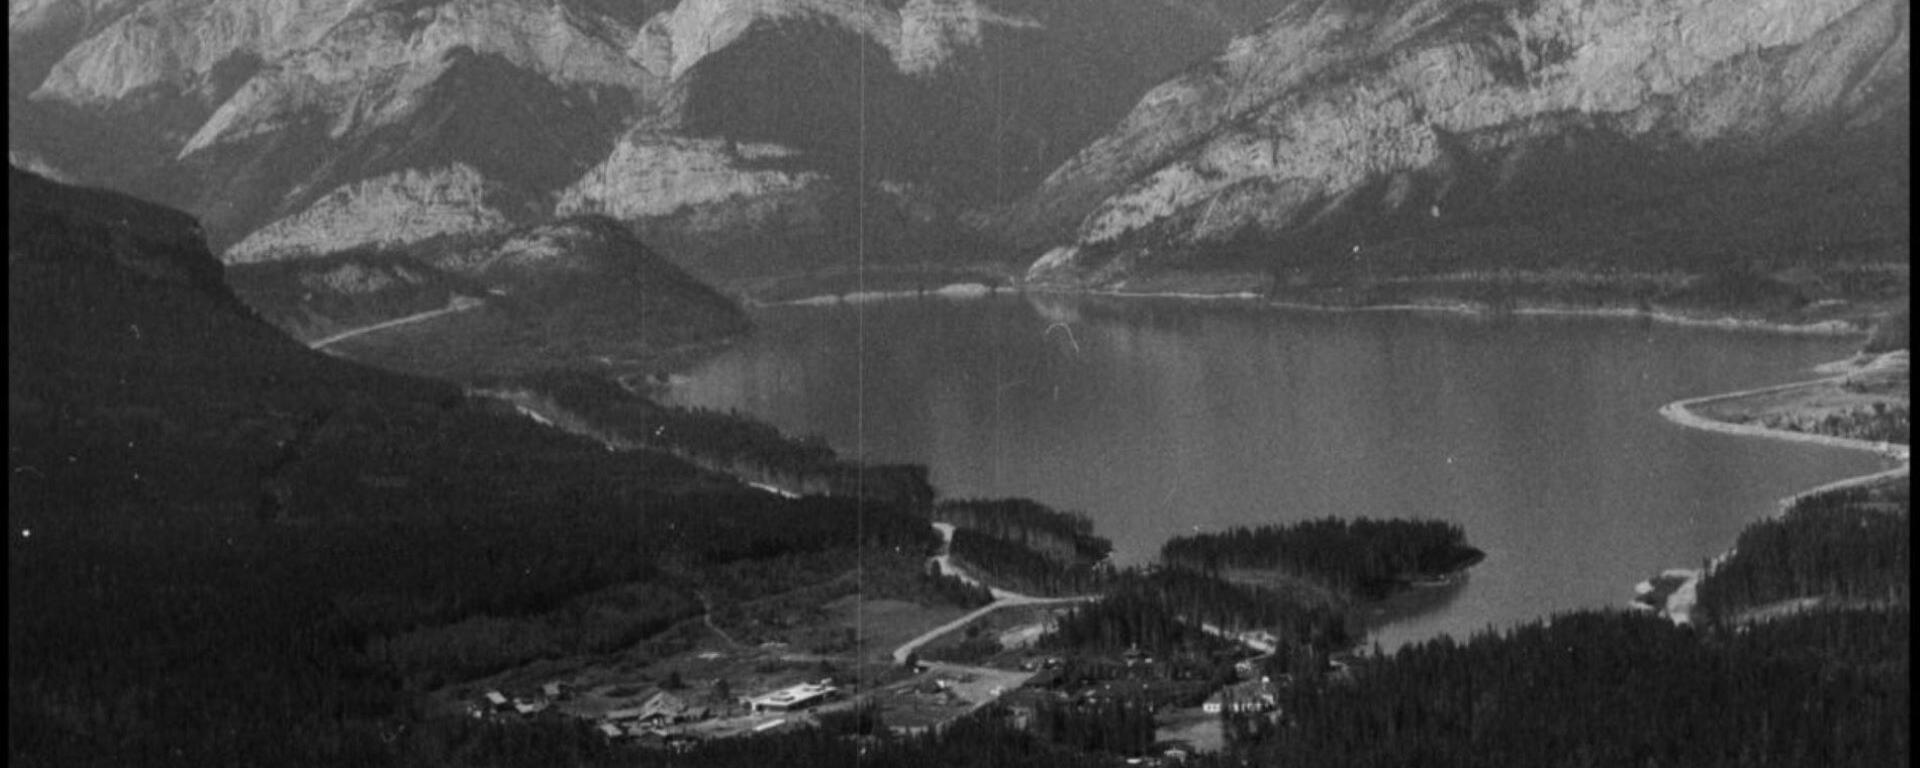 Aerial view of the Kananskis Field Station at Barrier Lake